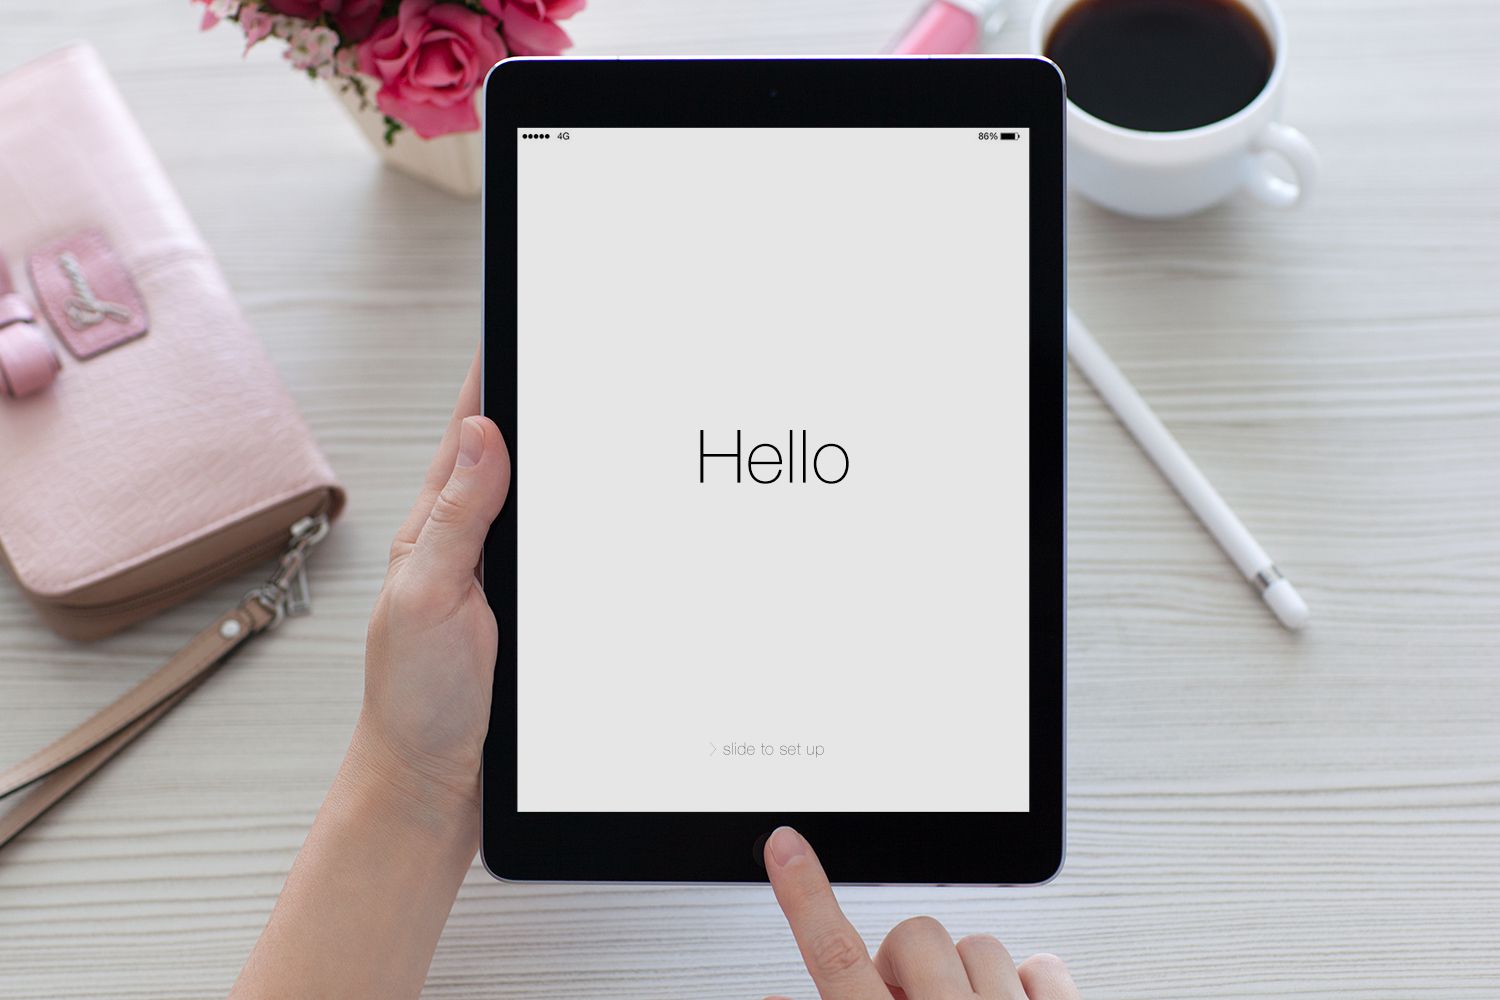 How to Fix an iPad Stuck at "Hello" or "Slide to Upgrade"